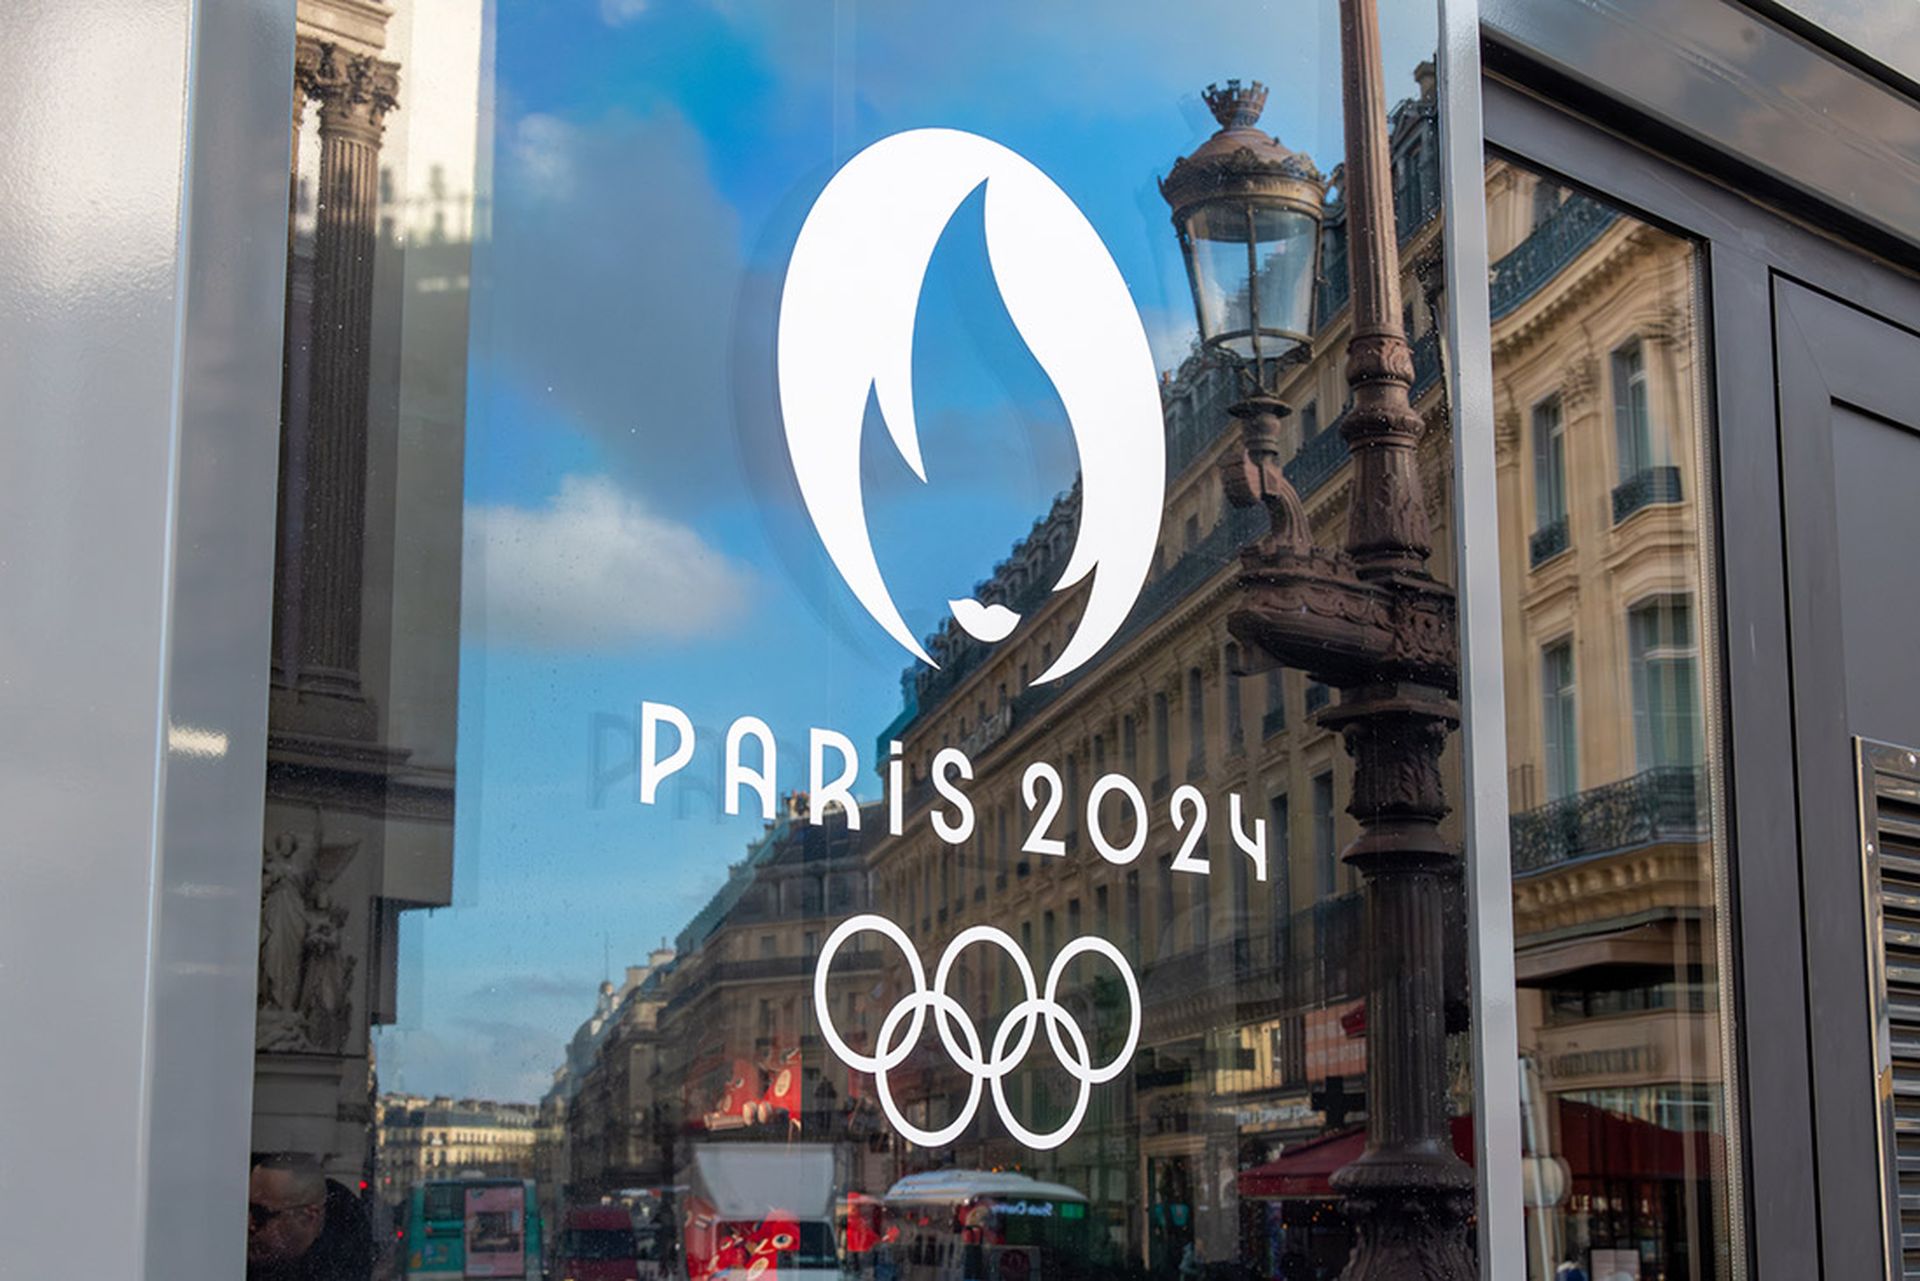 The interconnected rings of the Olympics logo and a design of the Olympic flame with the words Paris 2024 are seen on a window